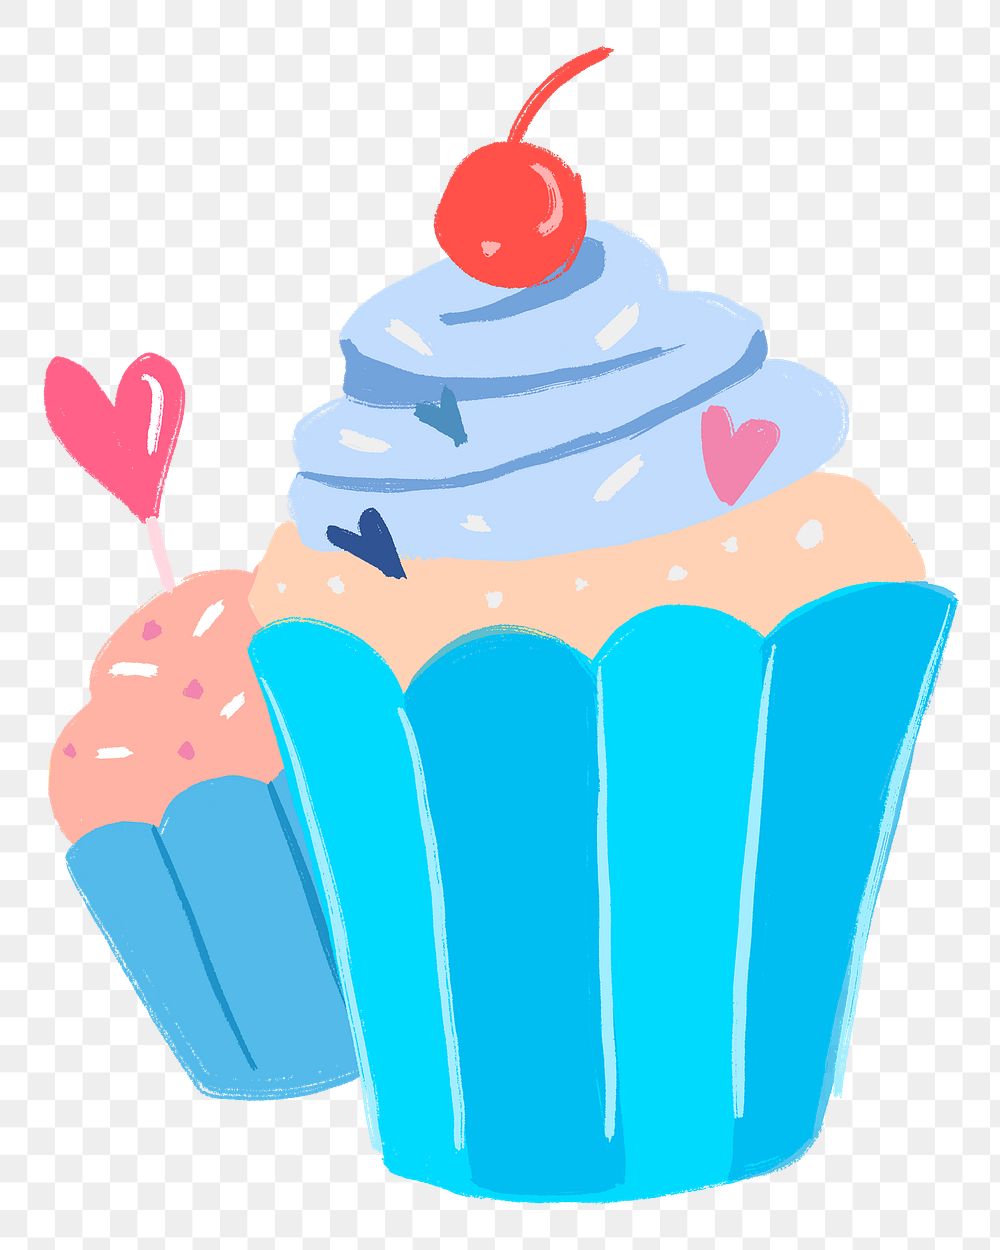 Cupcake PNG clipart, cute bakery icon